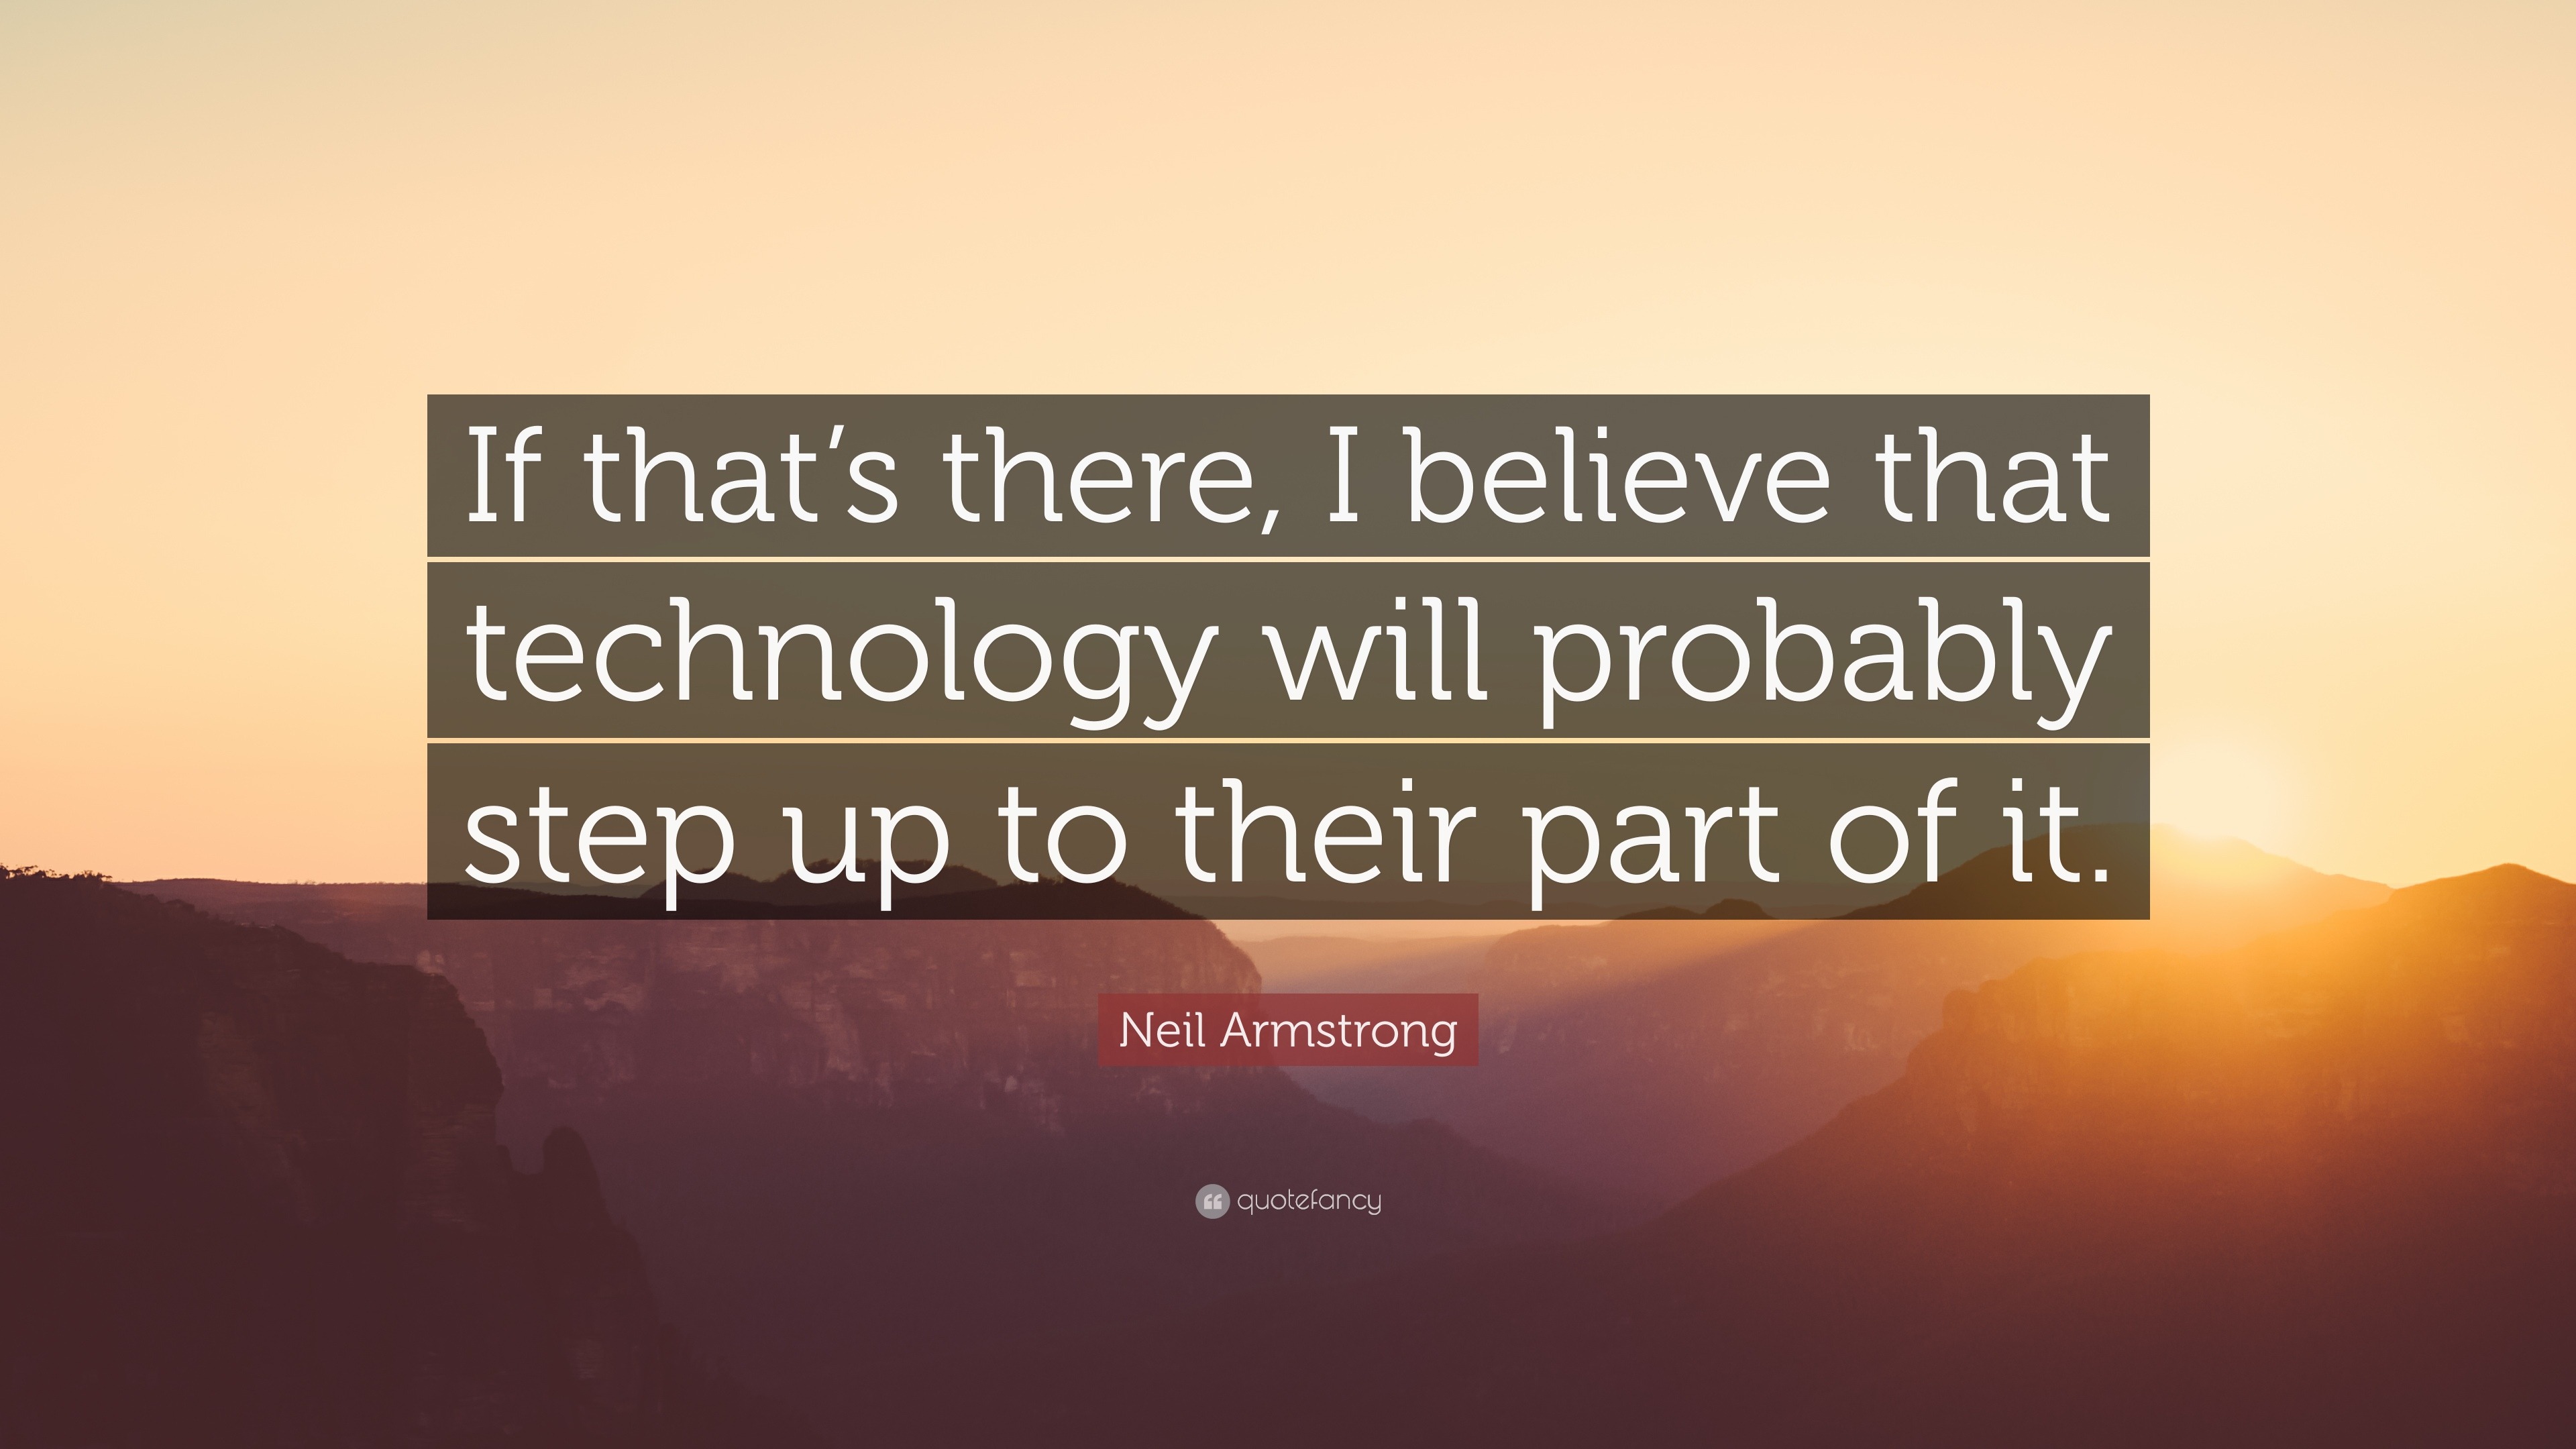 Neil Armstrong Quote: “If that’s there, I believe that technology will ...